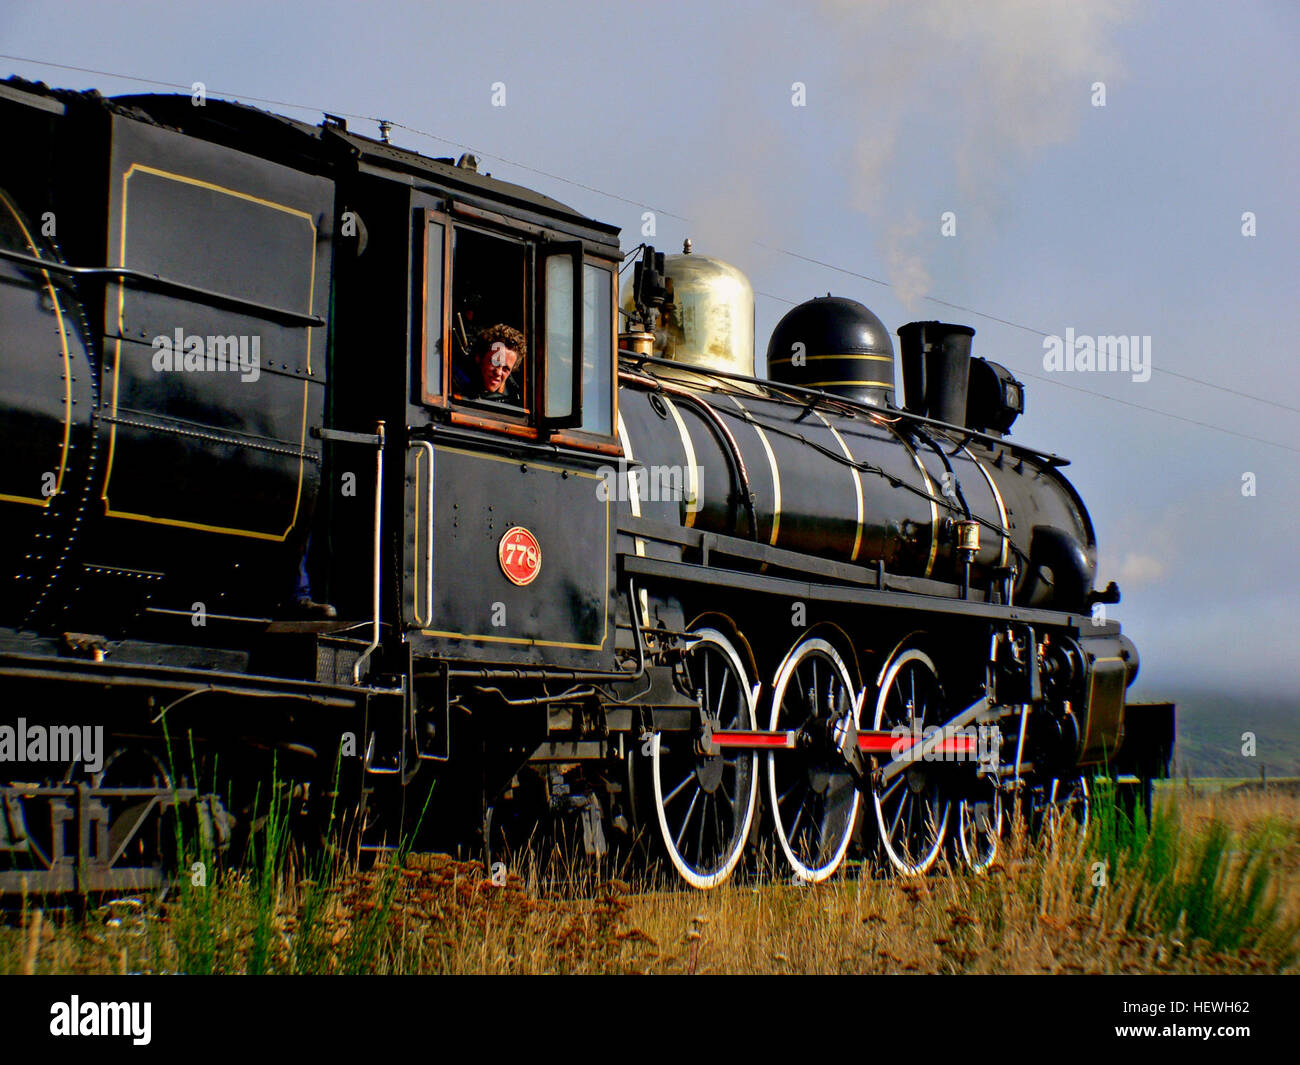 The Kingston Flyer is a vintage steam train in the South Island of New Zealand at the southern end of Lake Wakatipu. It used 14 kilometres of preserved track that once formed a part of the Kingston Branch. Stock Photo